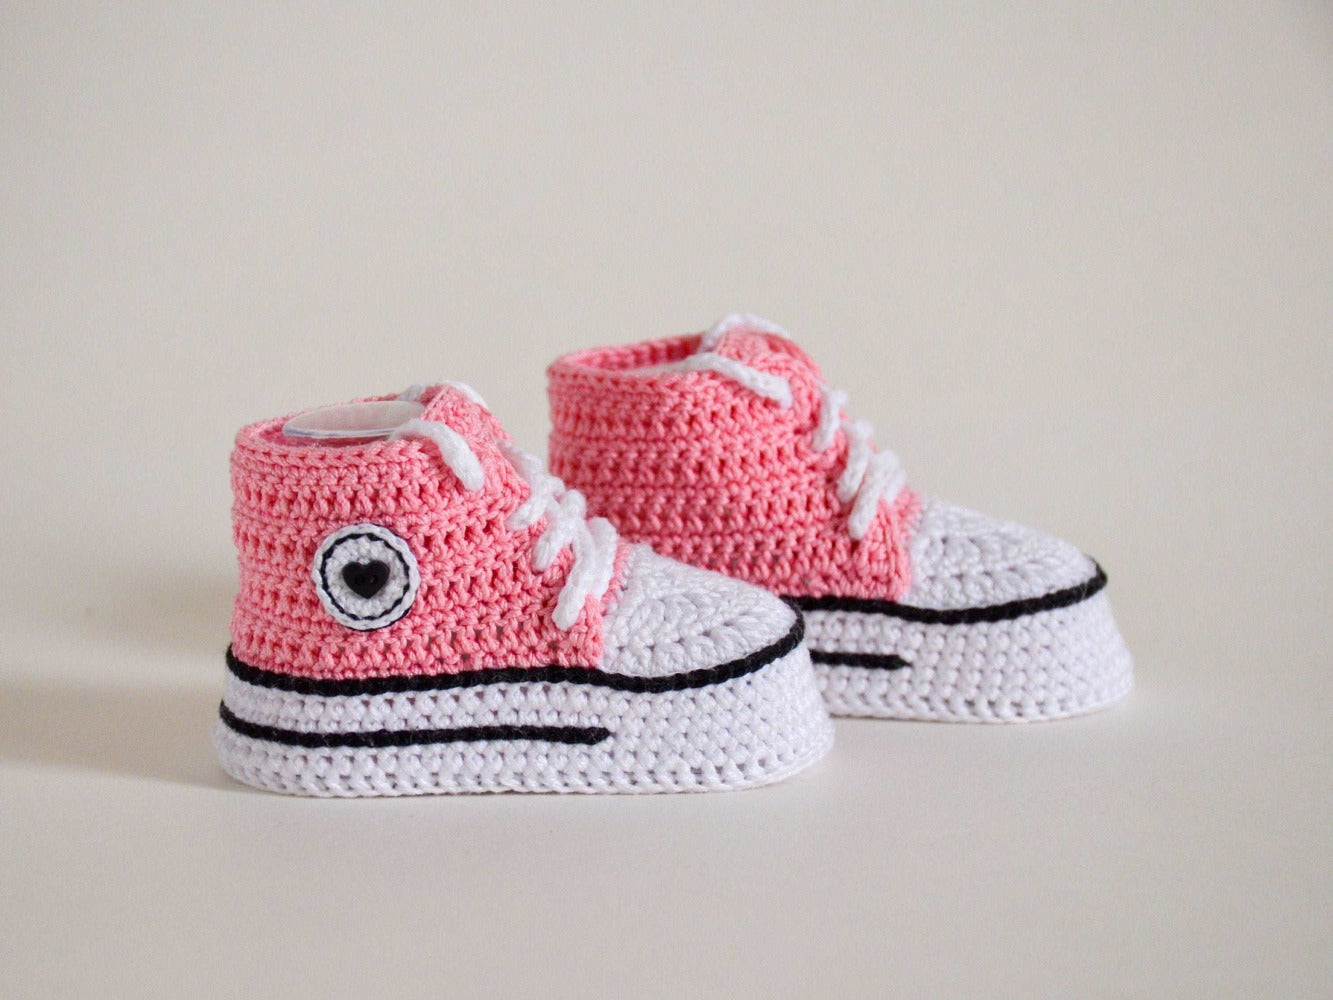 Baby high top sneakers crochet pattern converse-inspired